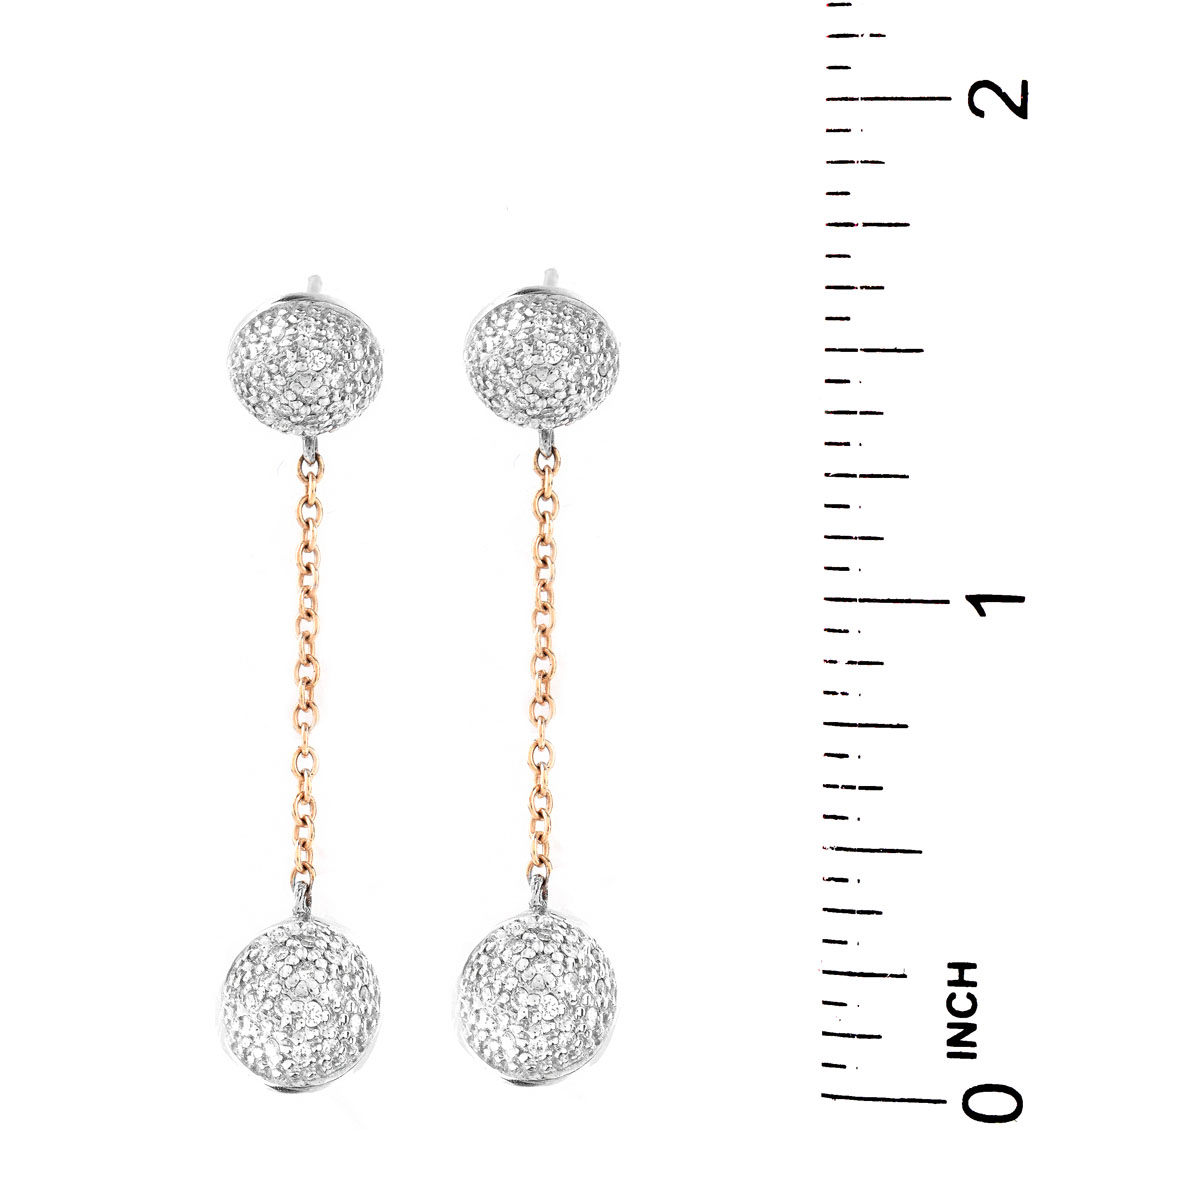 Micro Pave Diamond and 14 Karat White and Yellow Gold Dangle Earrings. Stamped 14K.